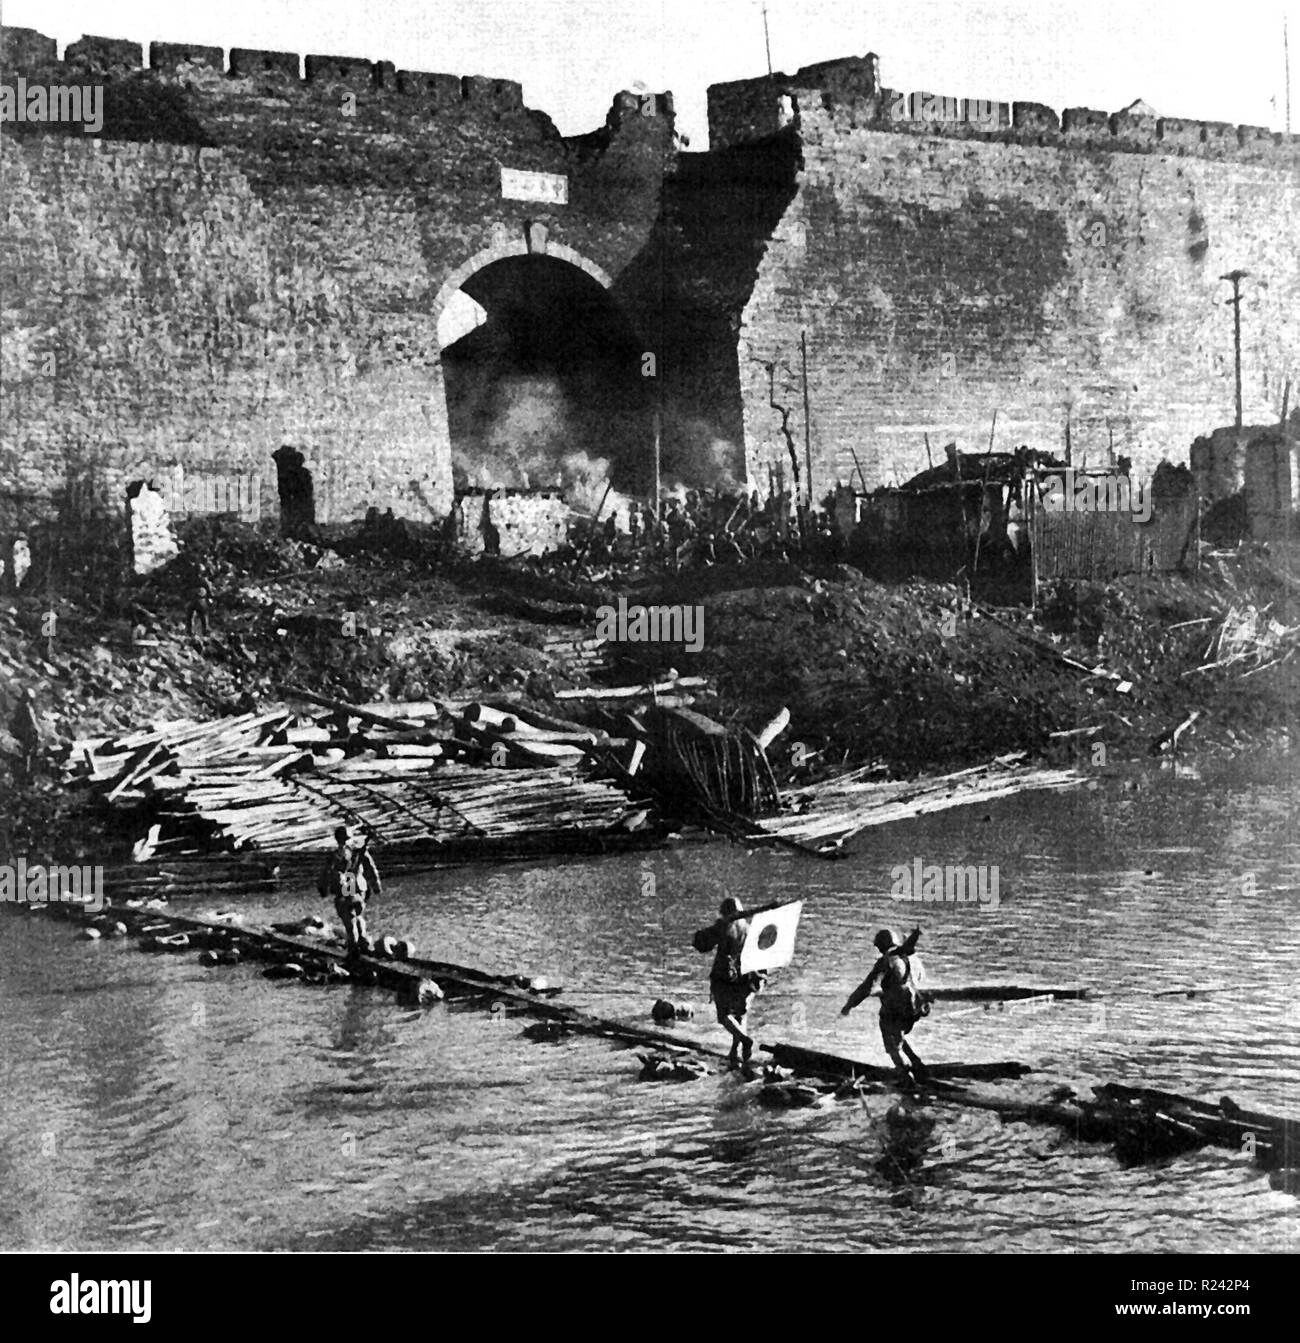 Japanese soldiers crossing a river near Nanjing City wall, China, 1937 Stock Photo